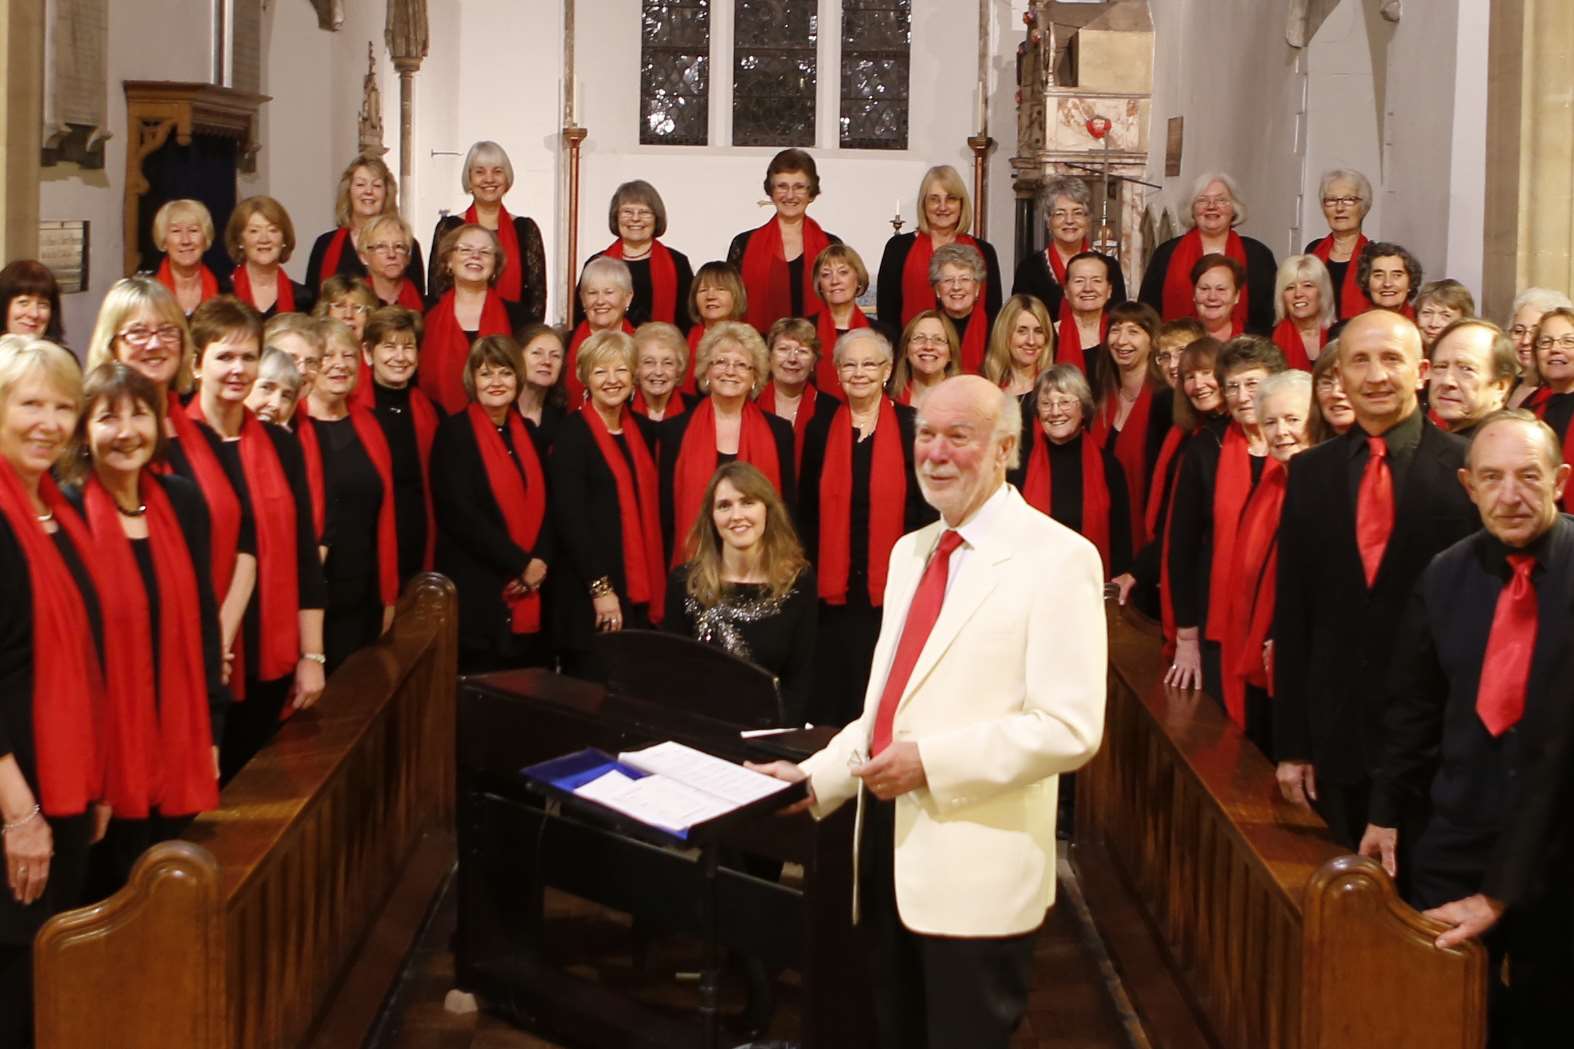 Jeffrey Vaughn Martin conducting the West Malling Community Choir at St Mary's Church in 2014